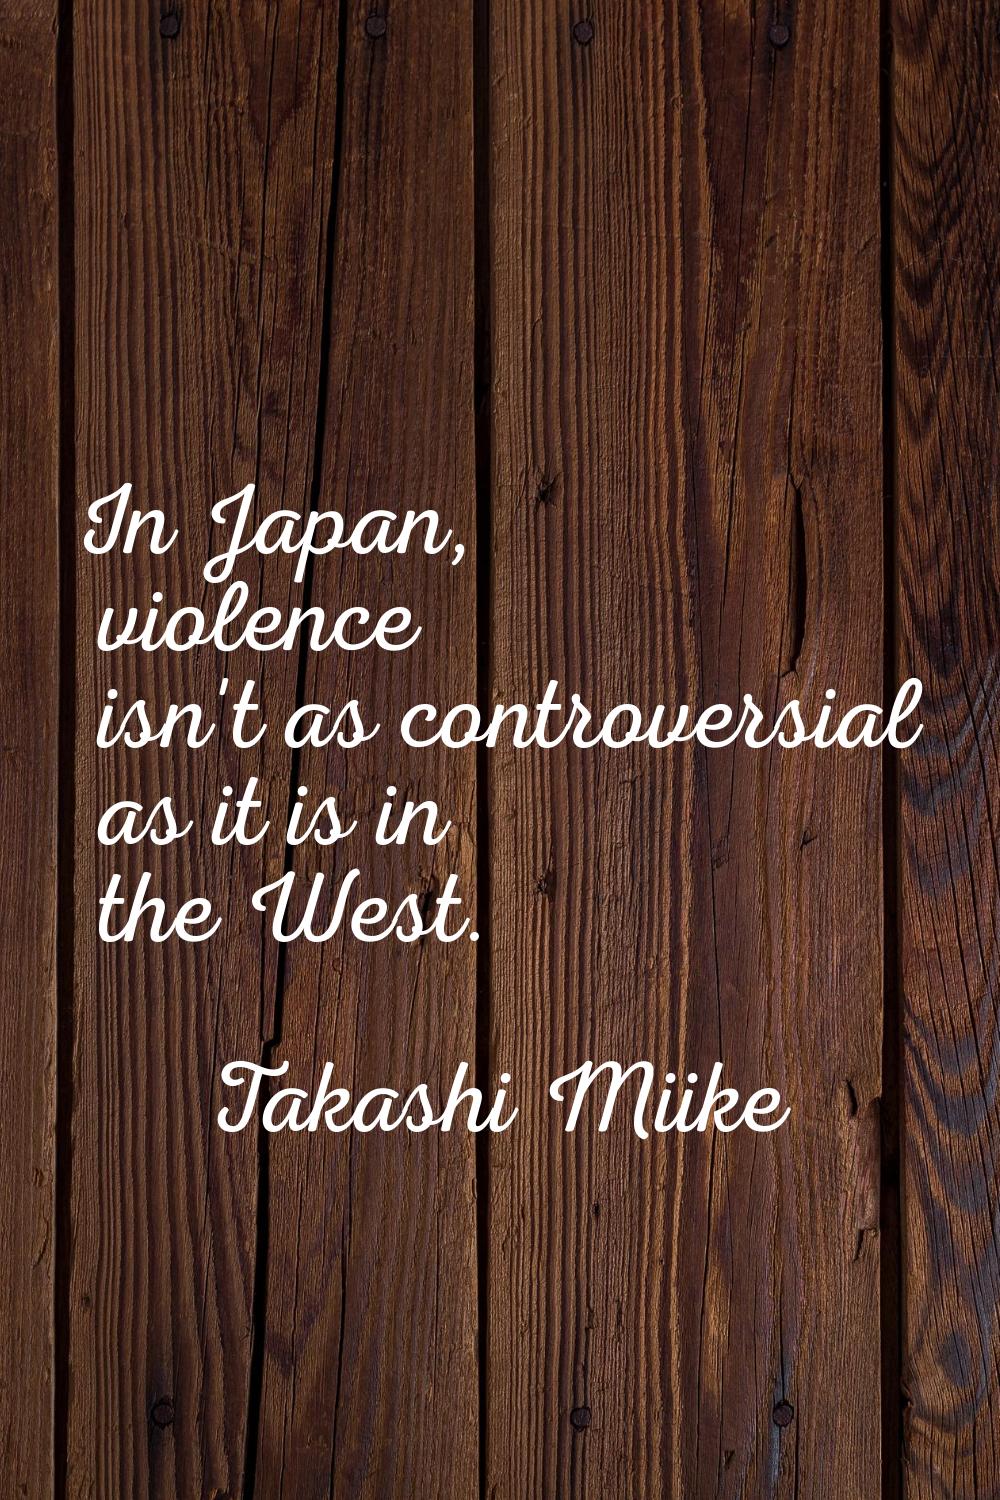 In Japan, violence isn't as controversial as it is in the West.